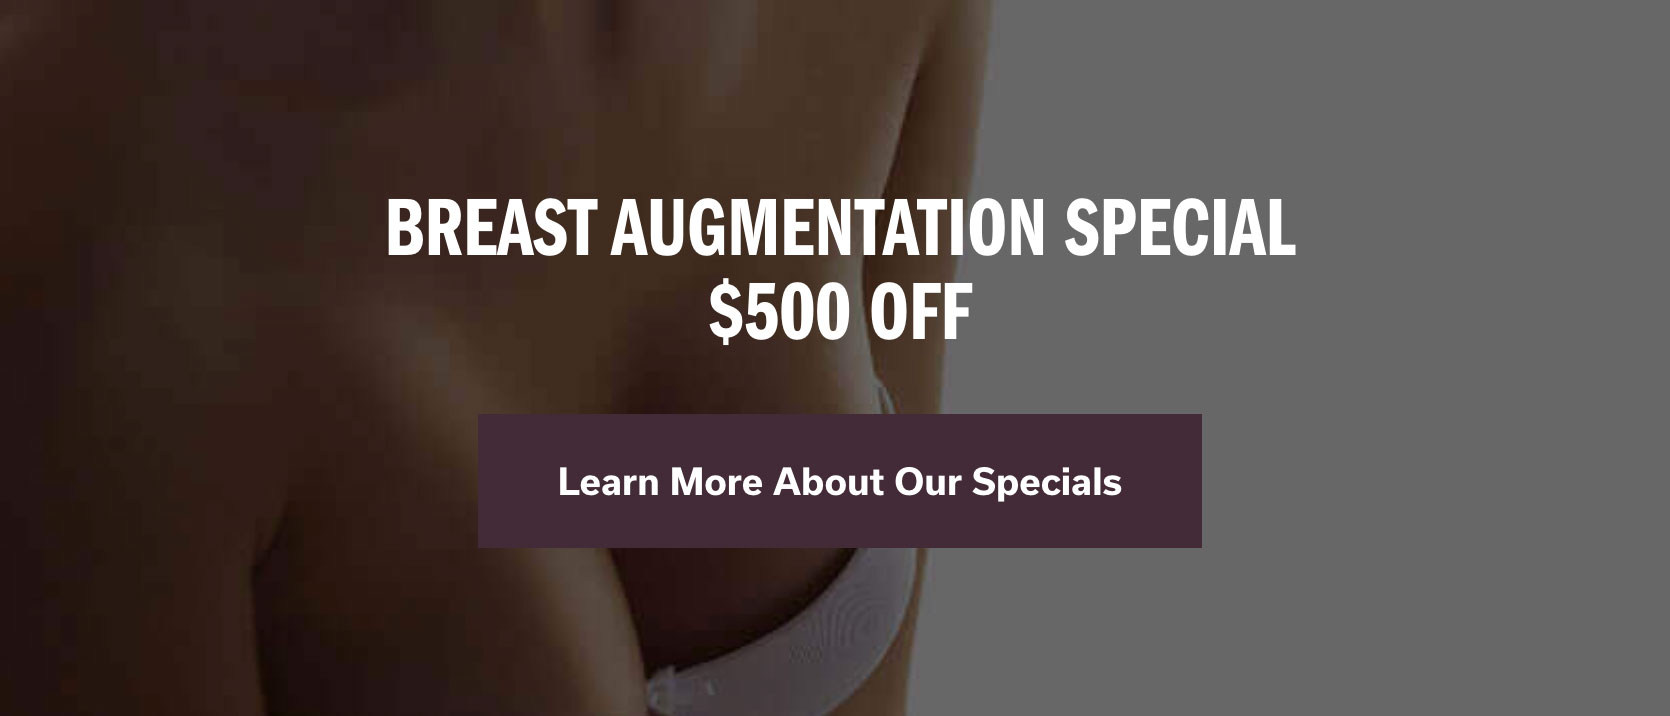 Banner for the breast augmentation special for $500 off